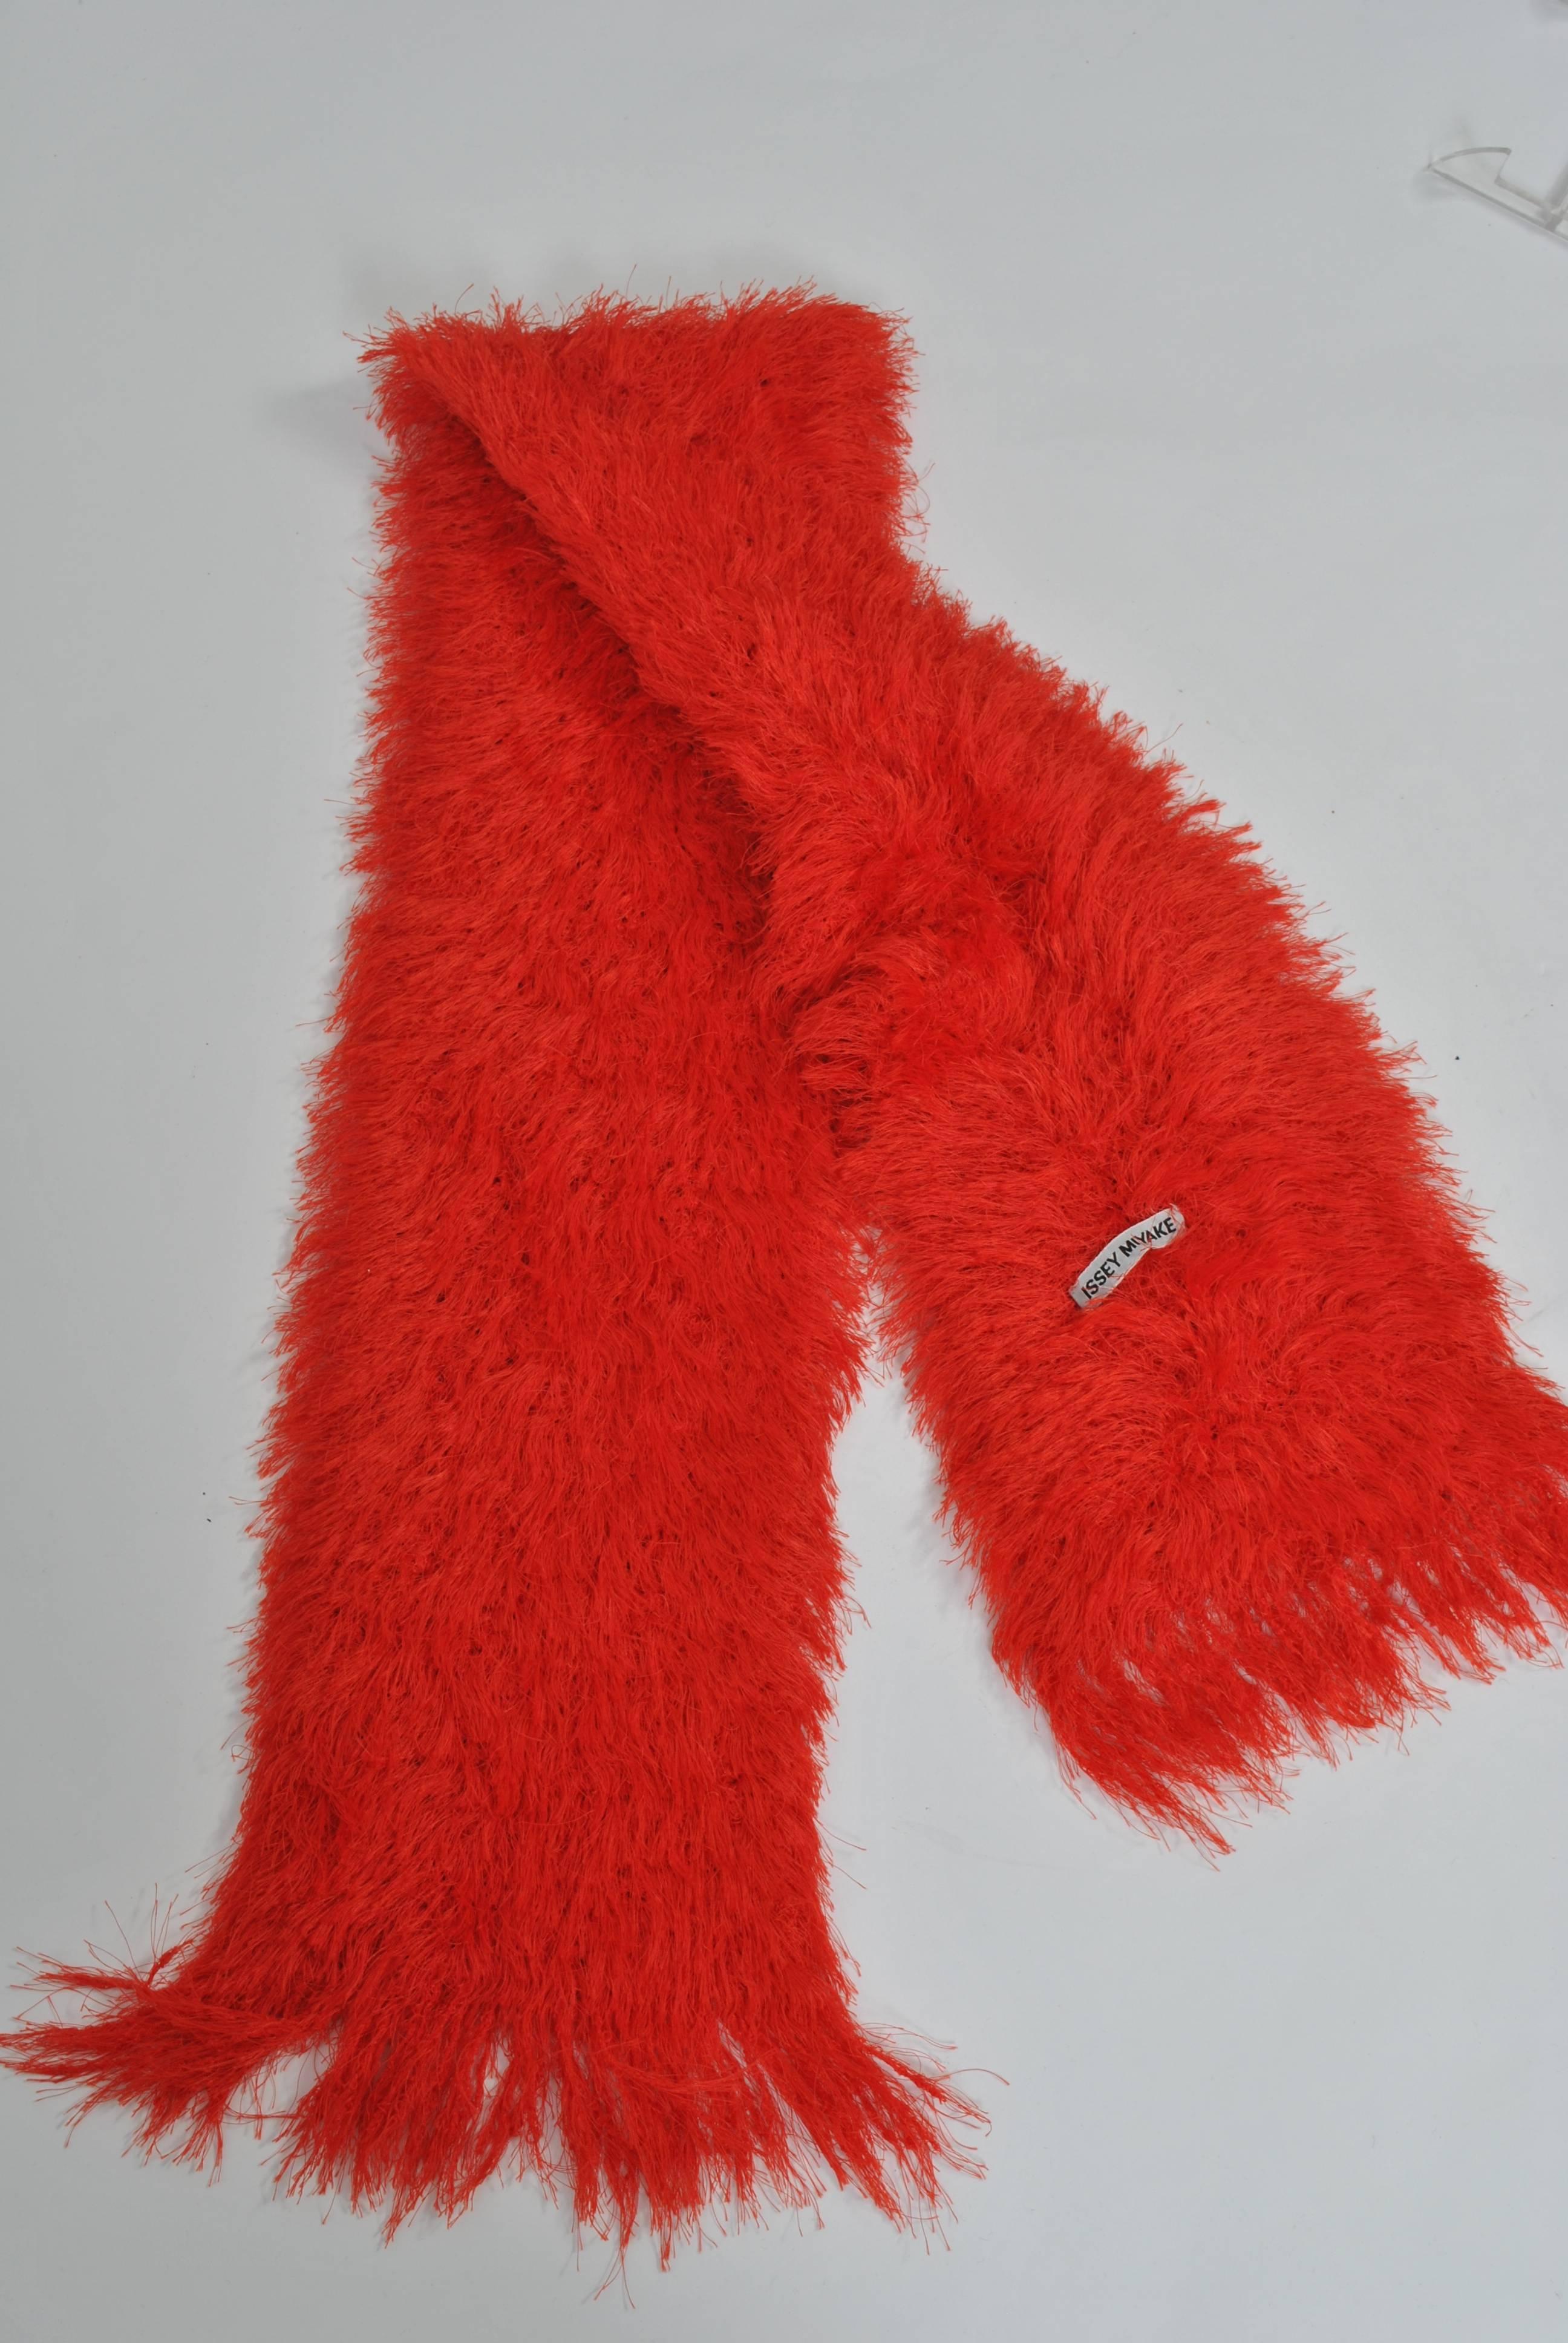 Orange double-faced eyelash scarf by Issey Miyake, rectangular shape, with fringed ends. Add a lively accent to your outfits. A great gift idea.